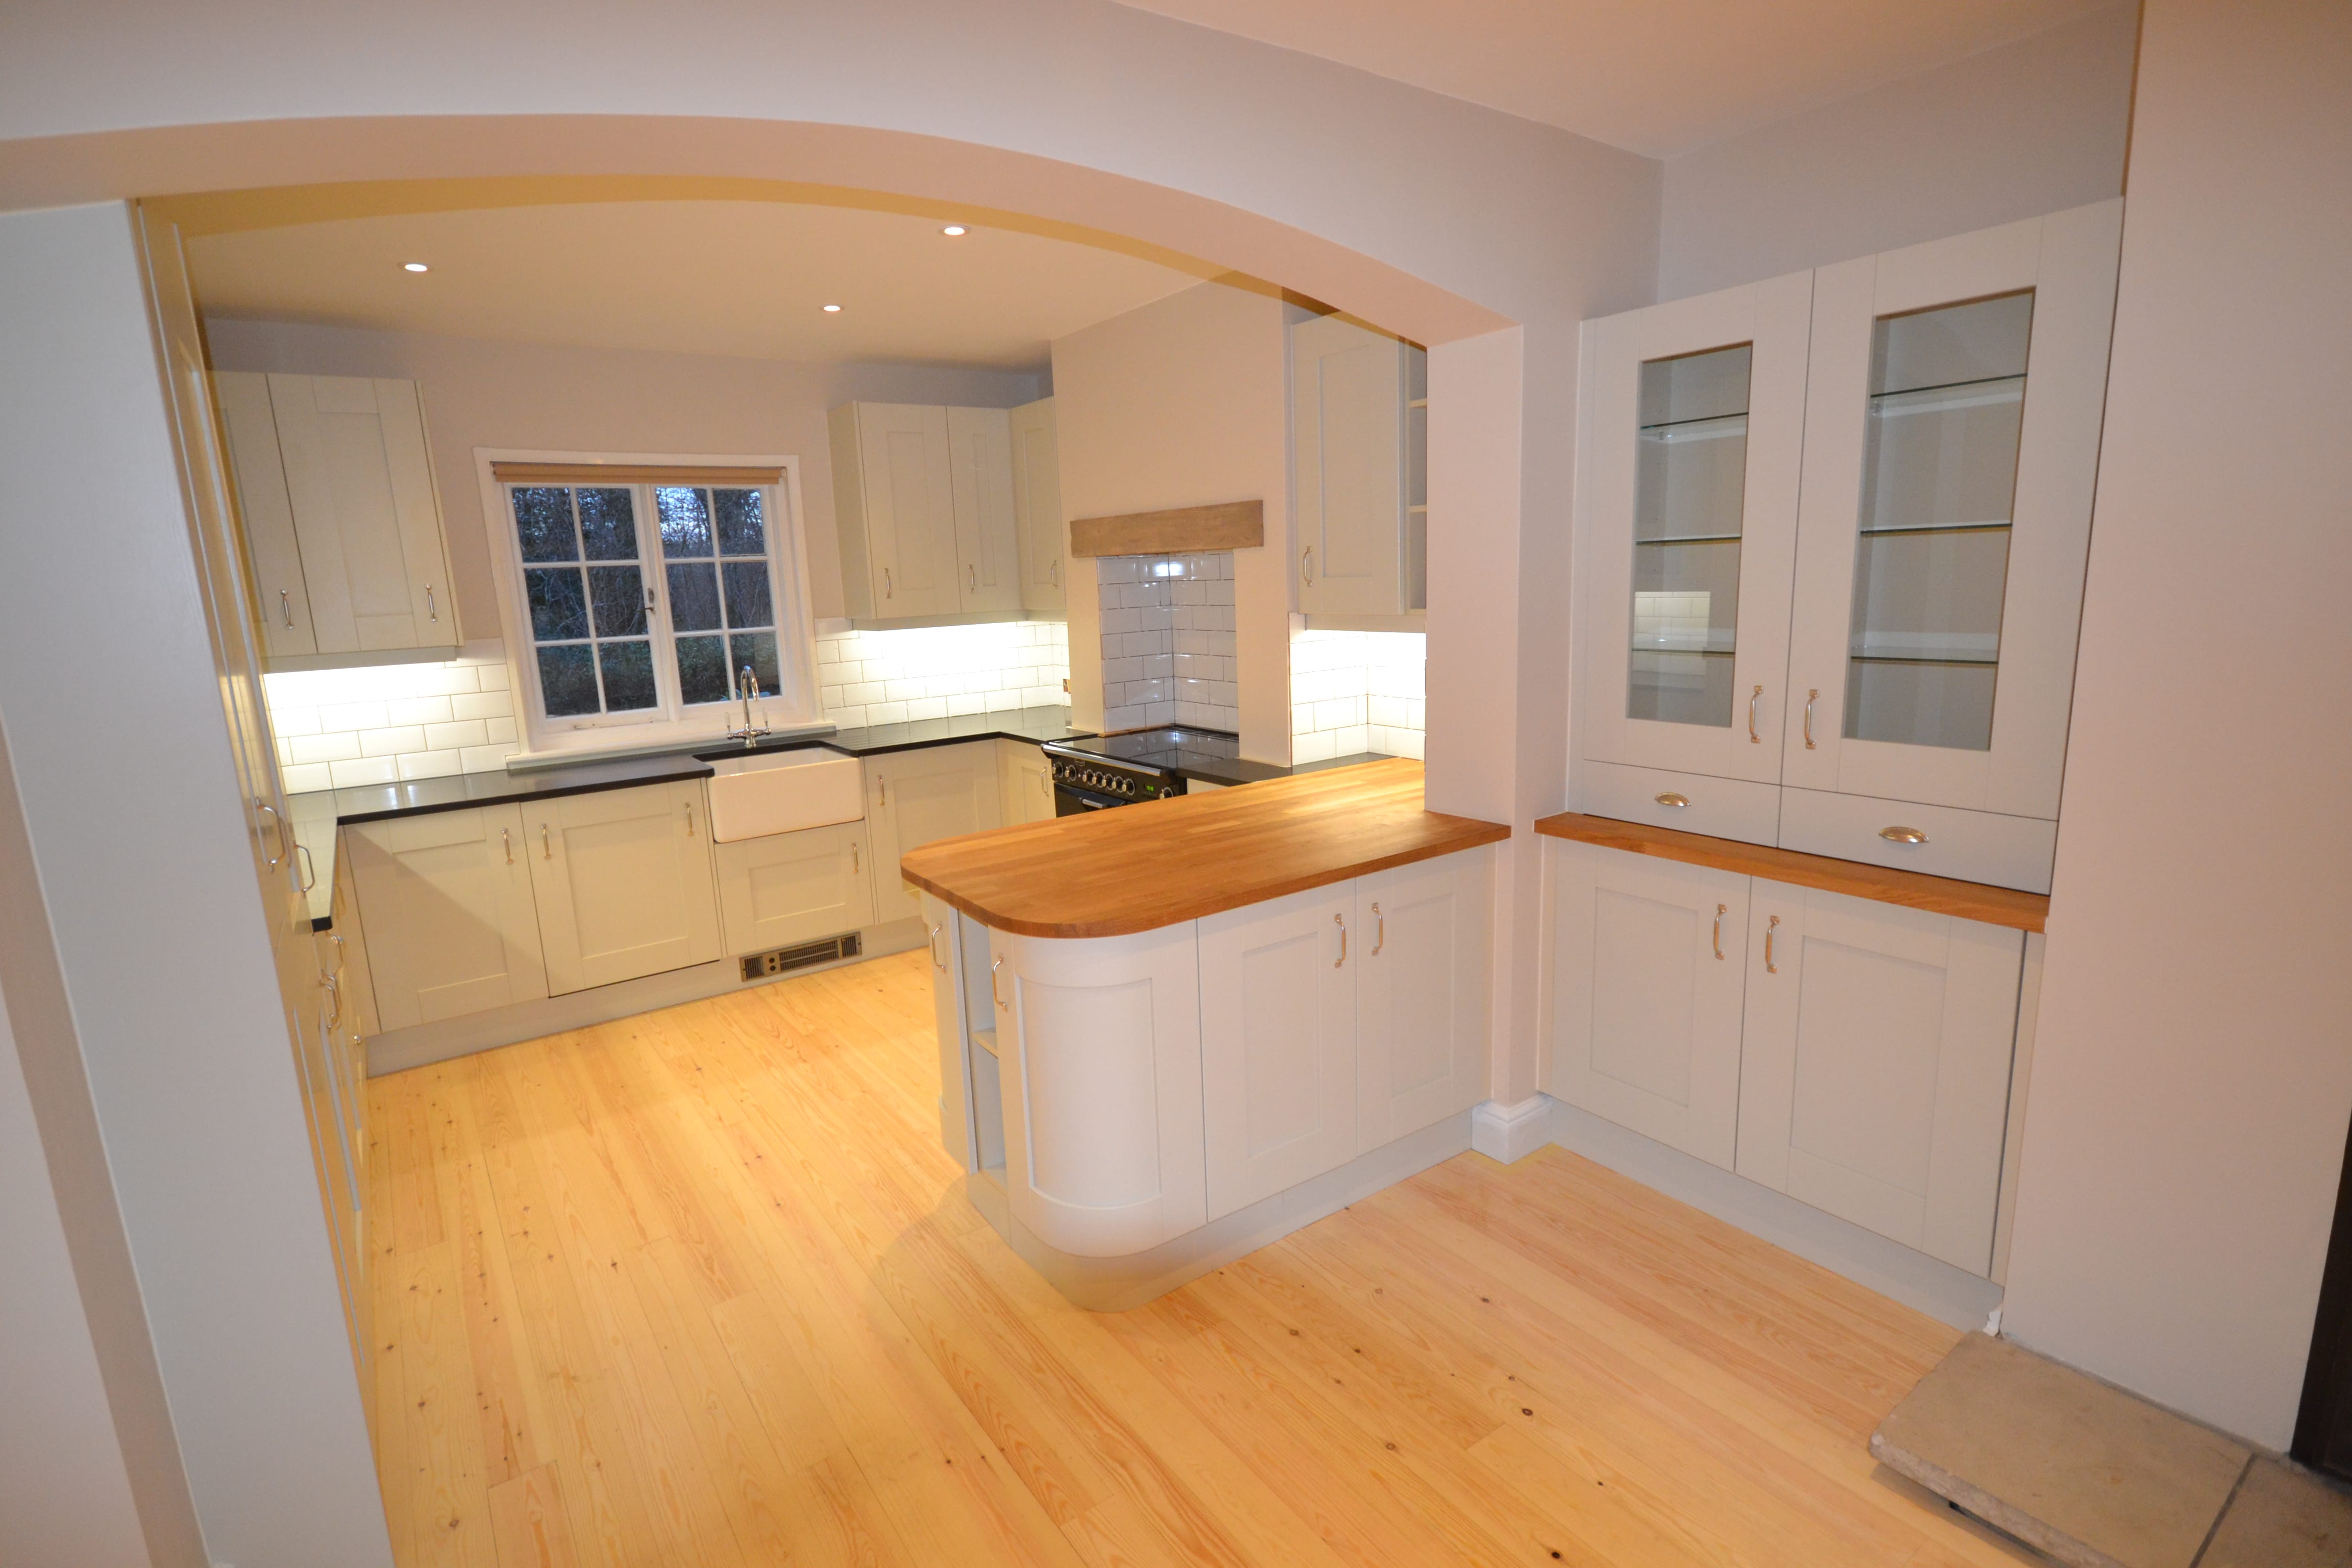 Cost of fitted kitchen uk